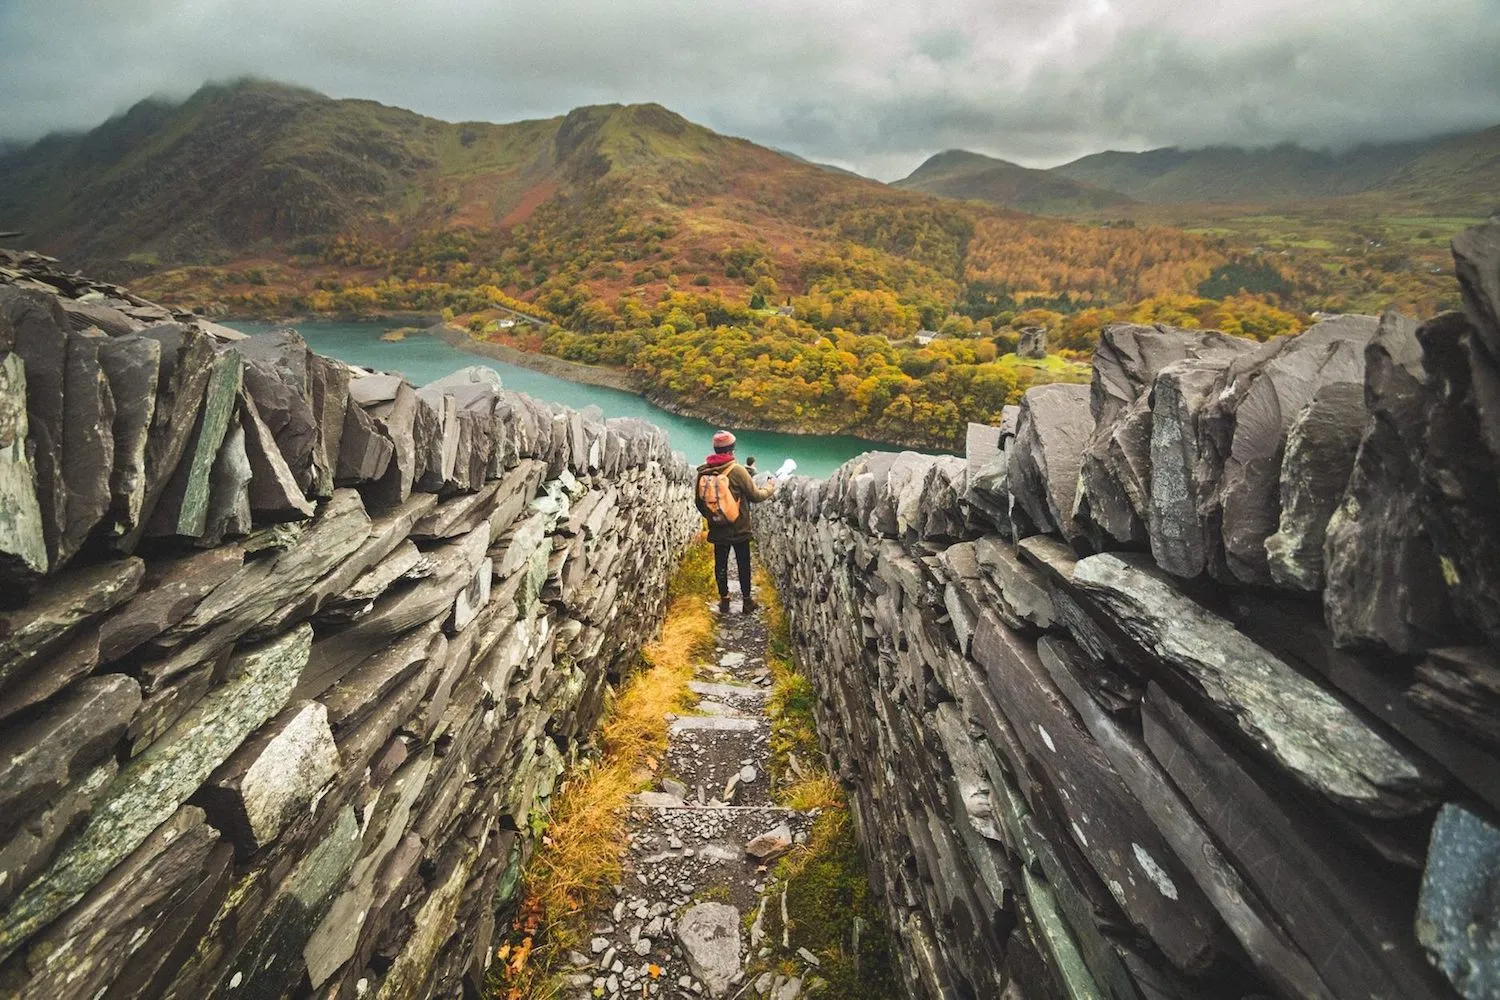 man standing between two high stone walls, surrounded by grassy hills & mountains